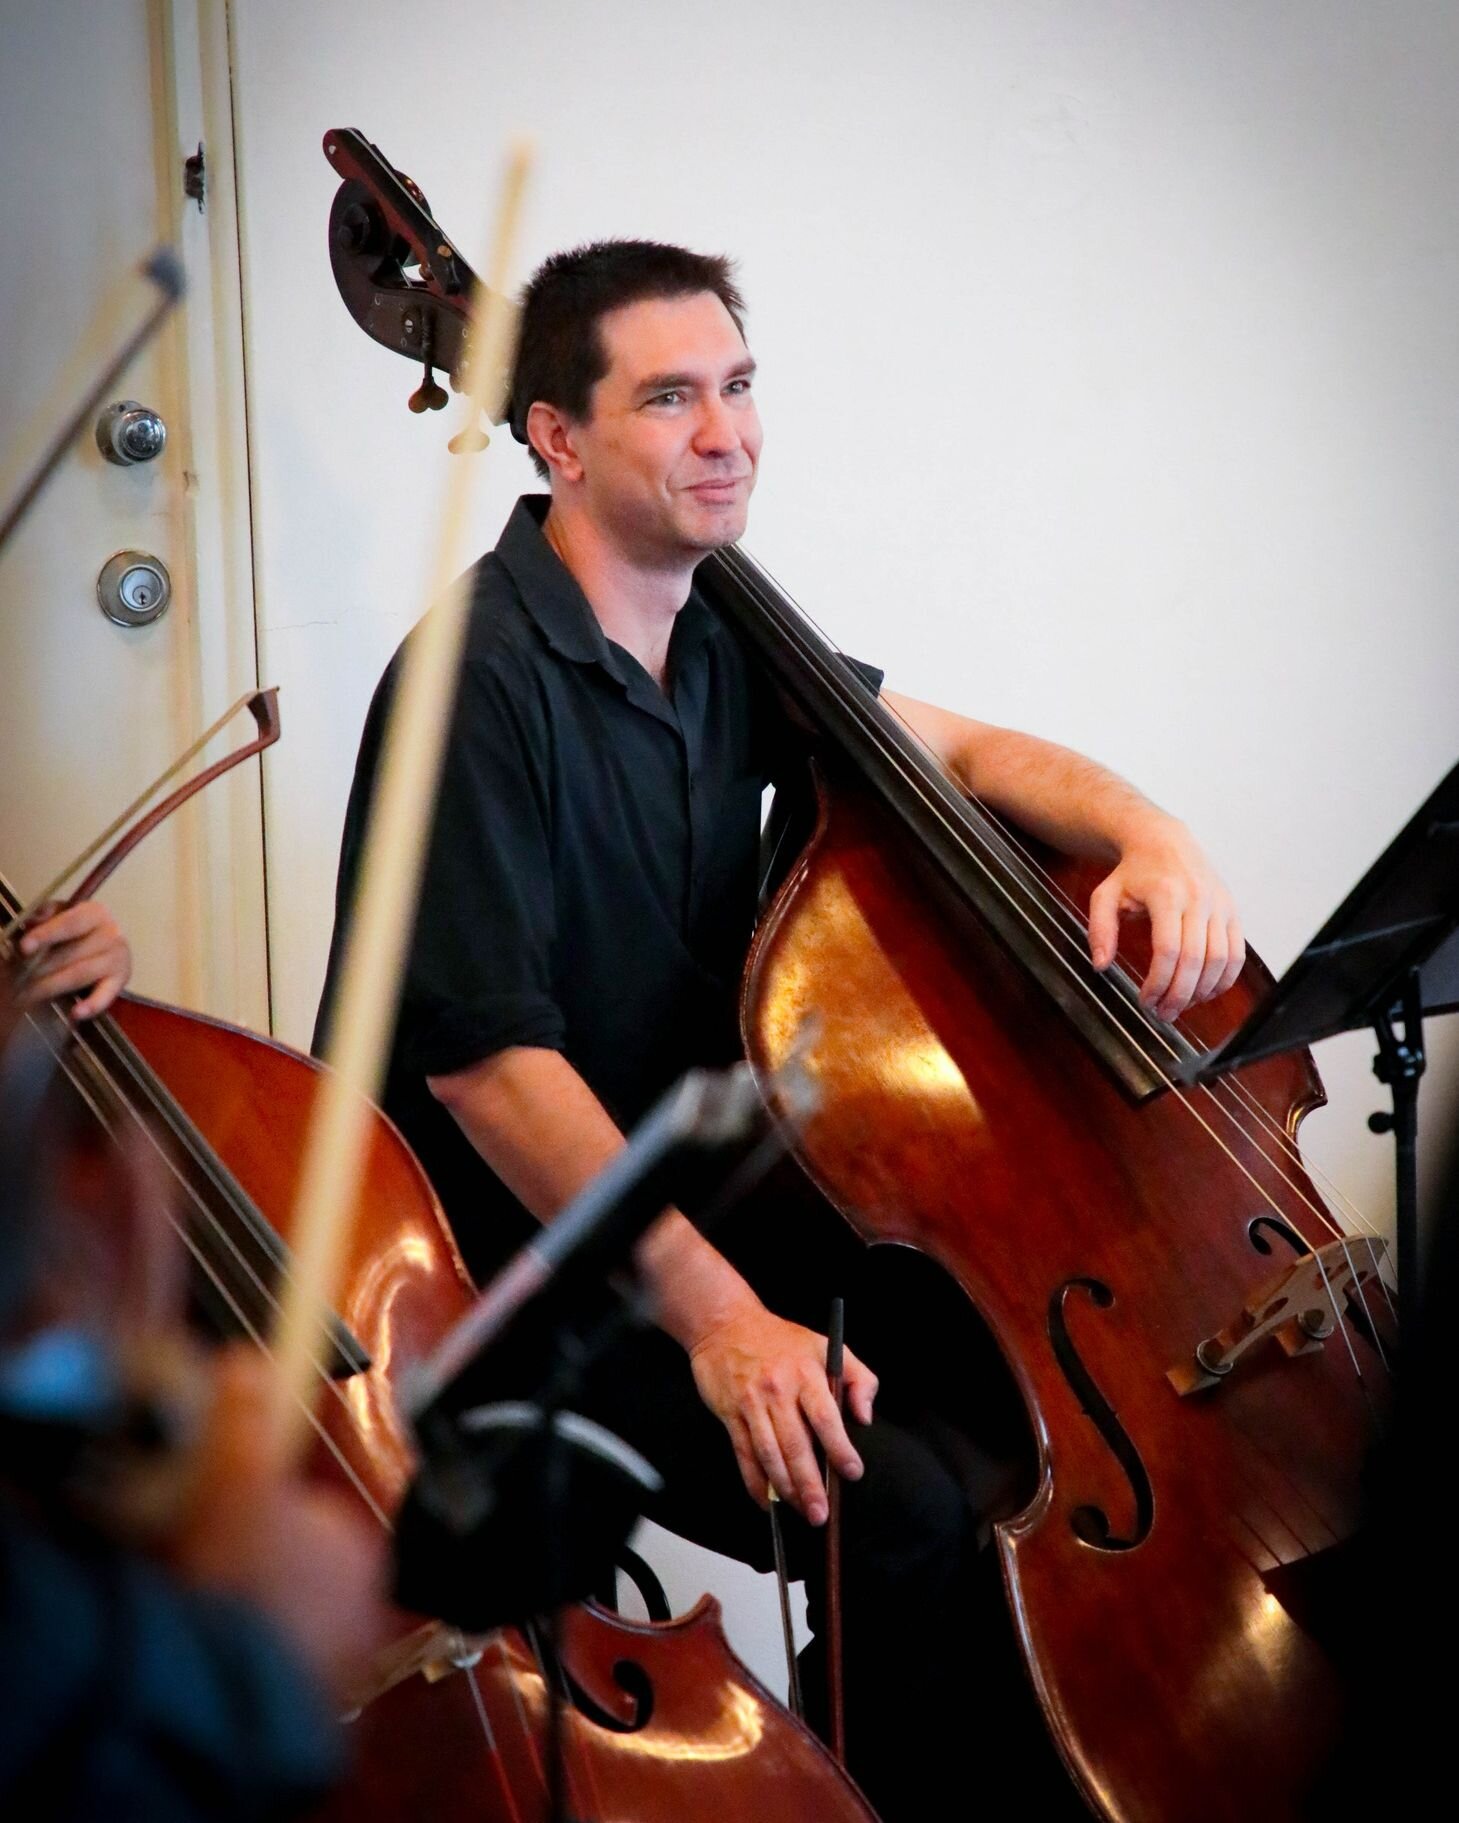 The heart of the orchestra - our double bassist Jeremy Fox

 #classicalmusic #classical #chamberorchestra #strings #doublebass #doublebassist